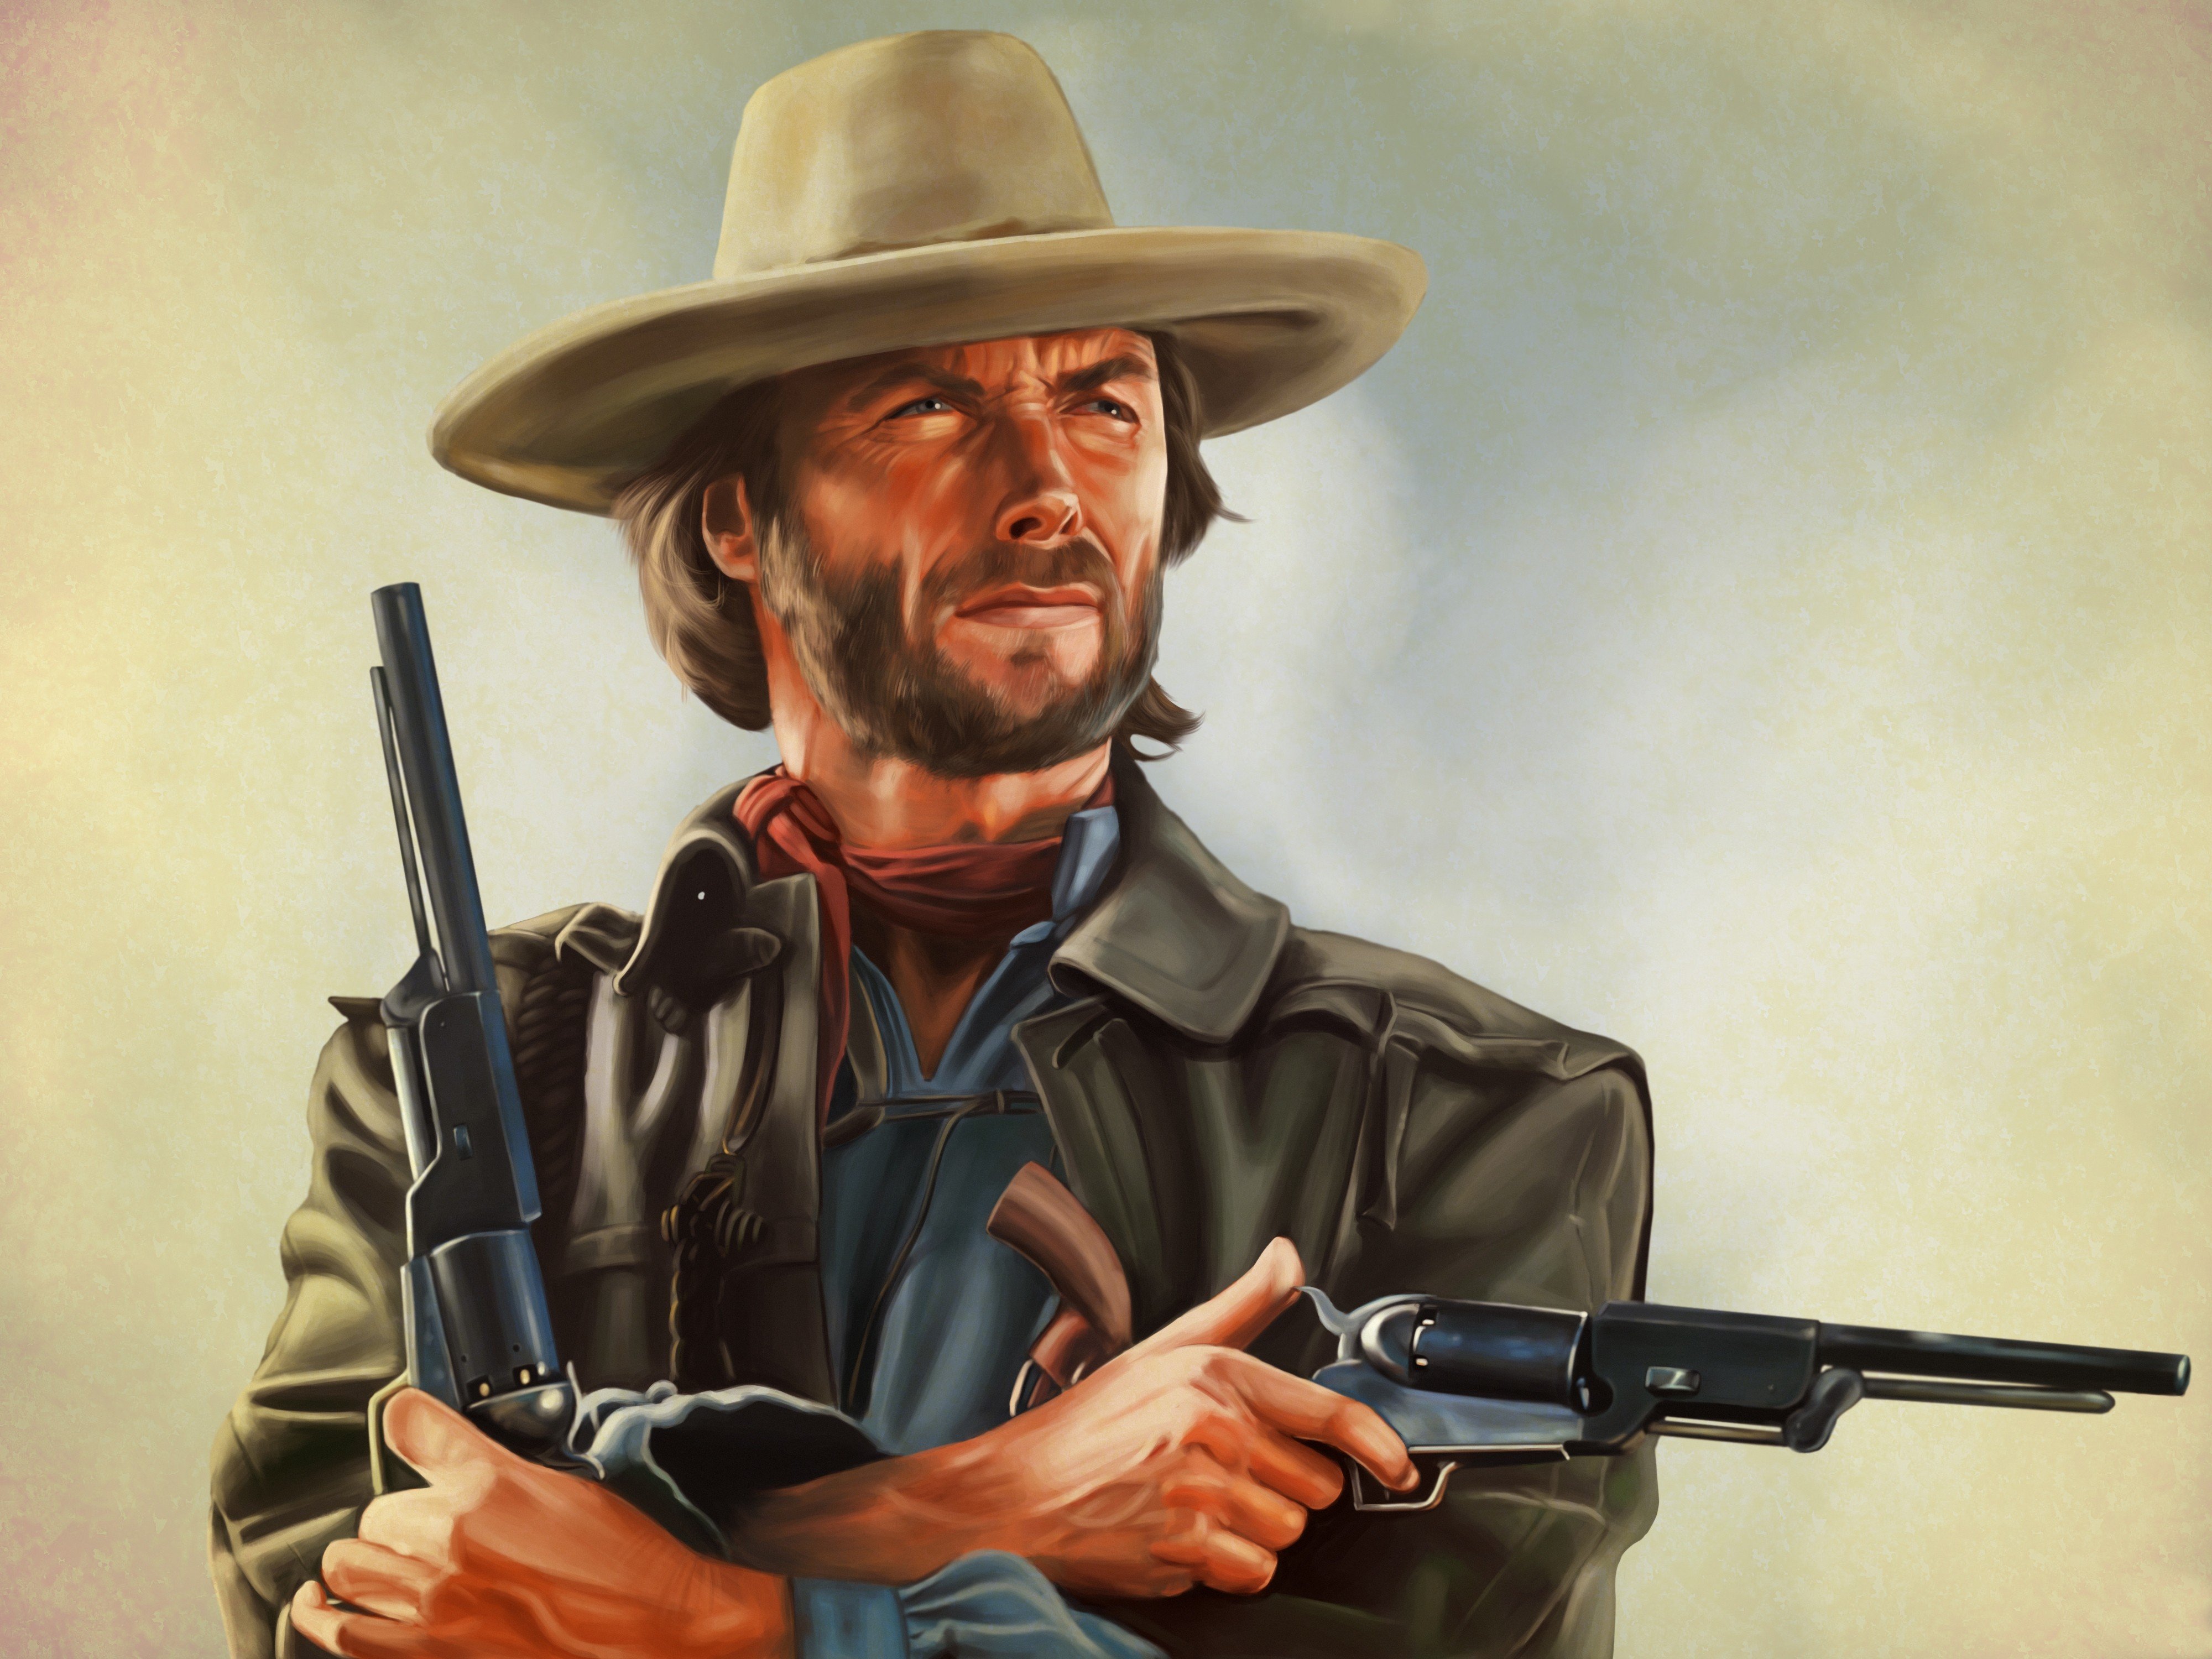 Wallpaper Art Revolver The Outlaw Clint Eastwood Josey Wales